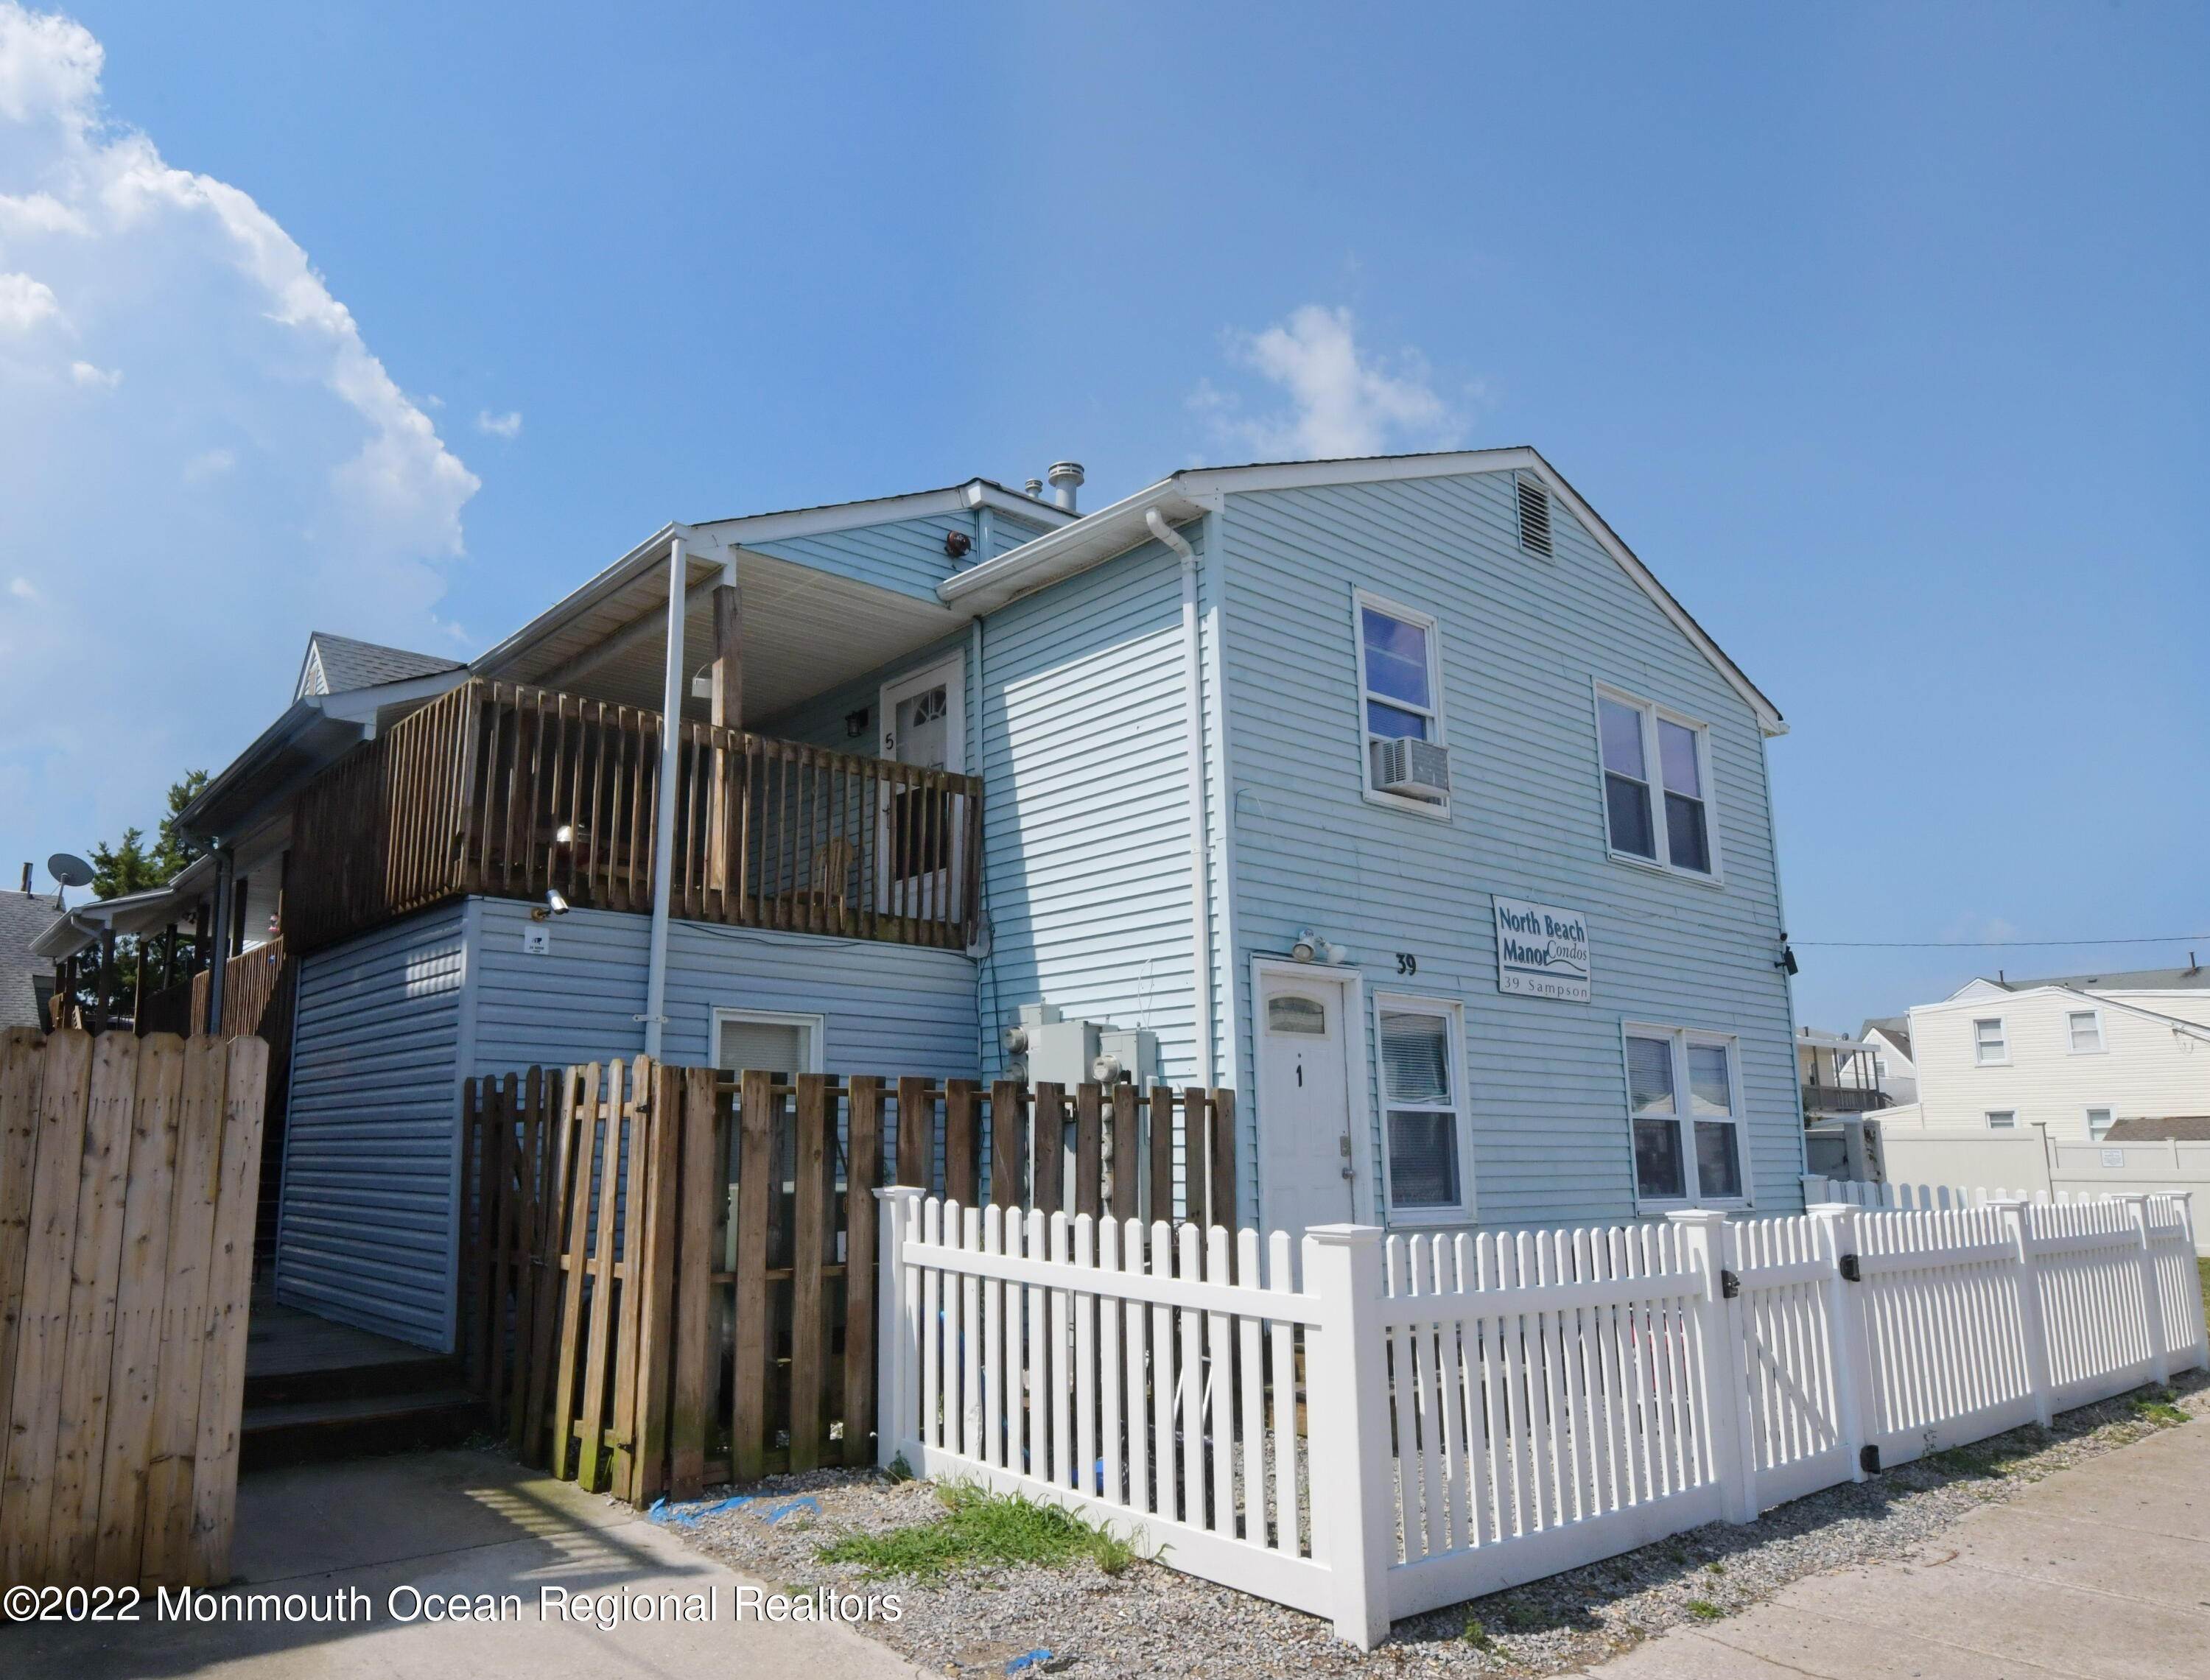 Single Family Homes for Sale at 39 Sampson Avenue B5 Seaside Heights, New Jersey 08751 United States